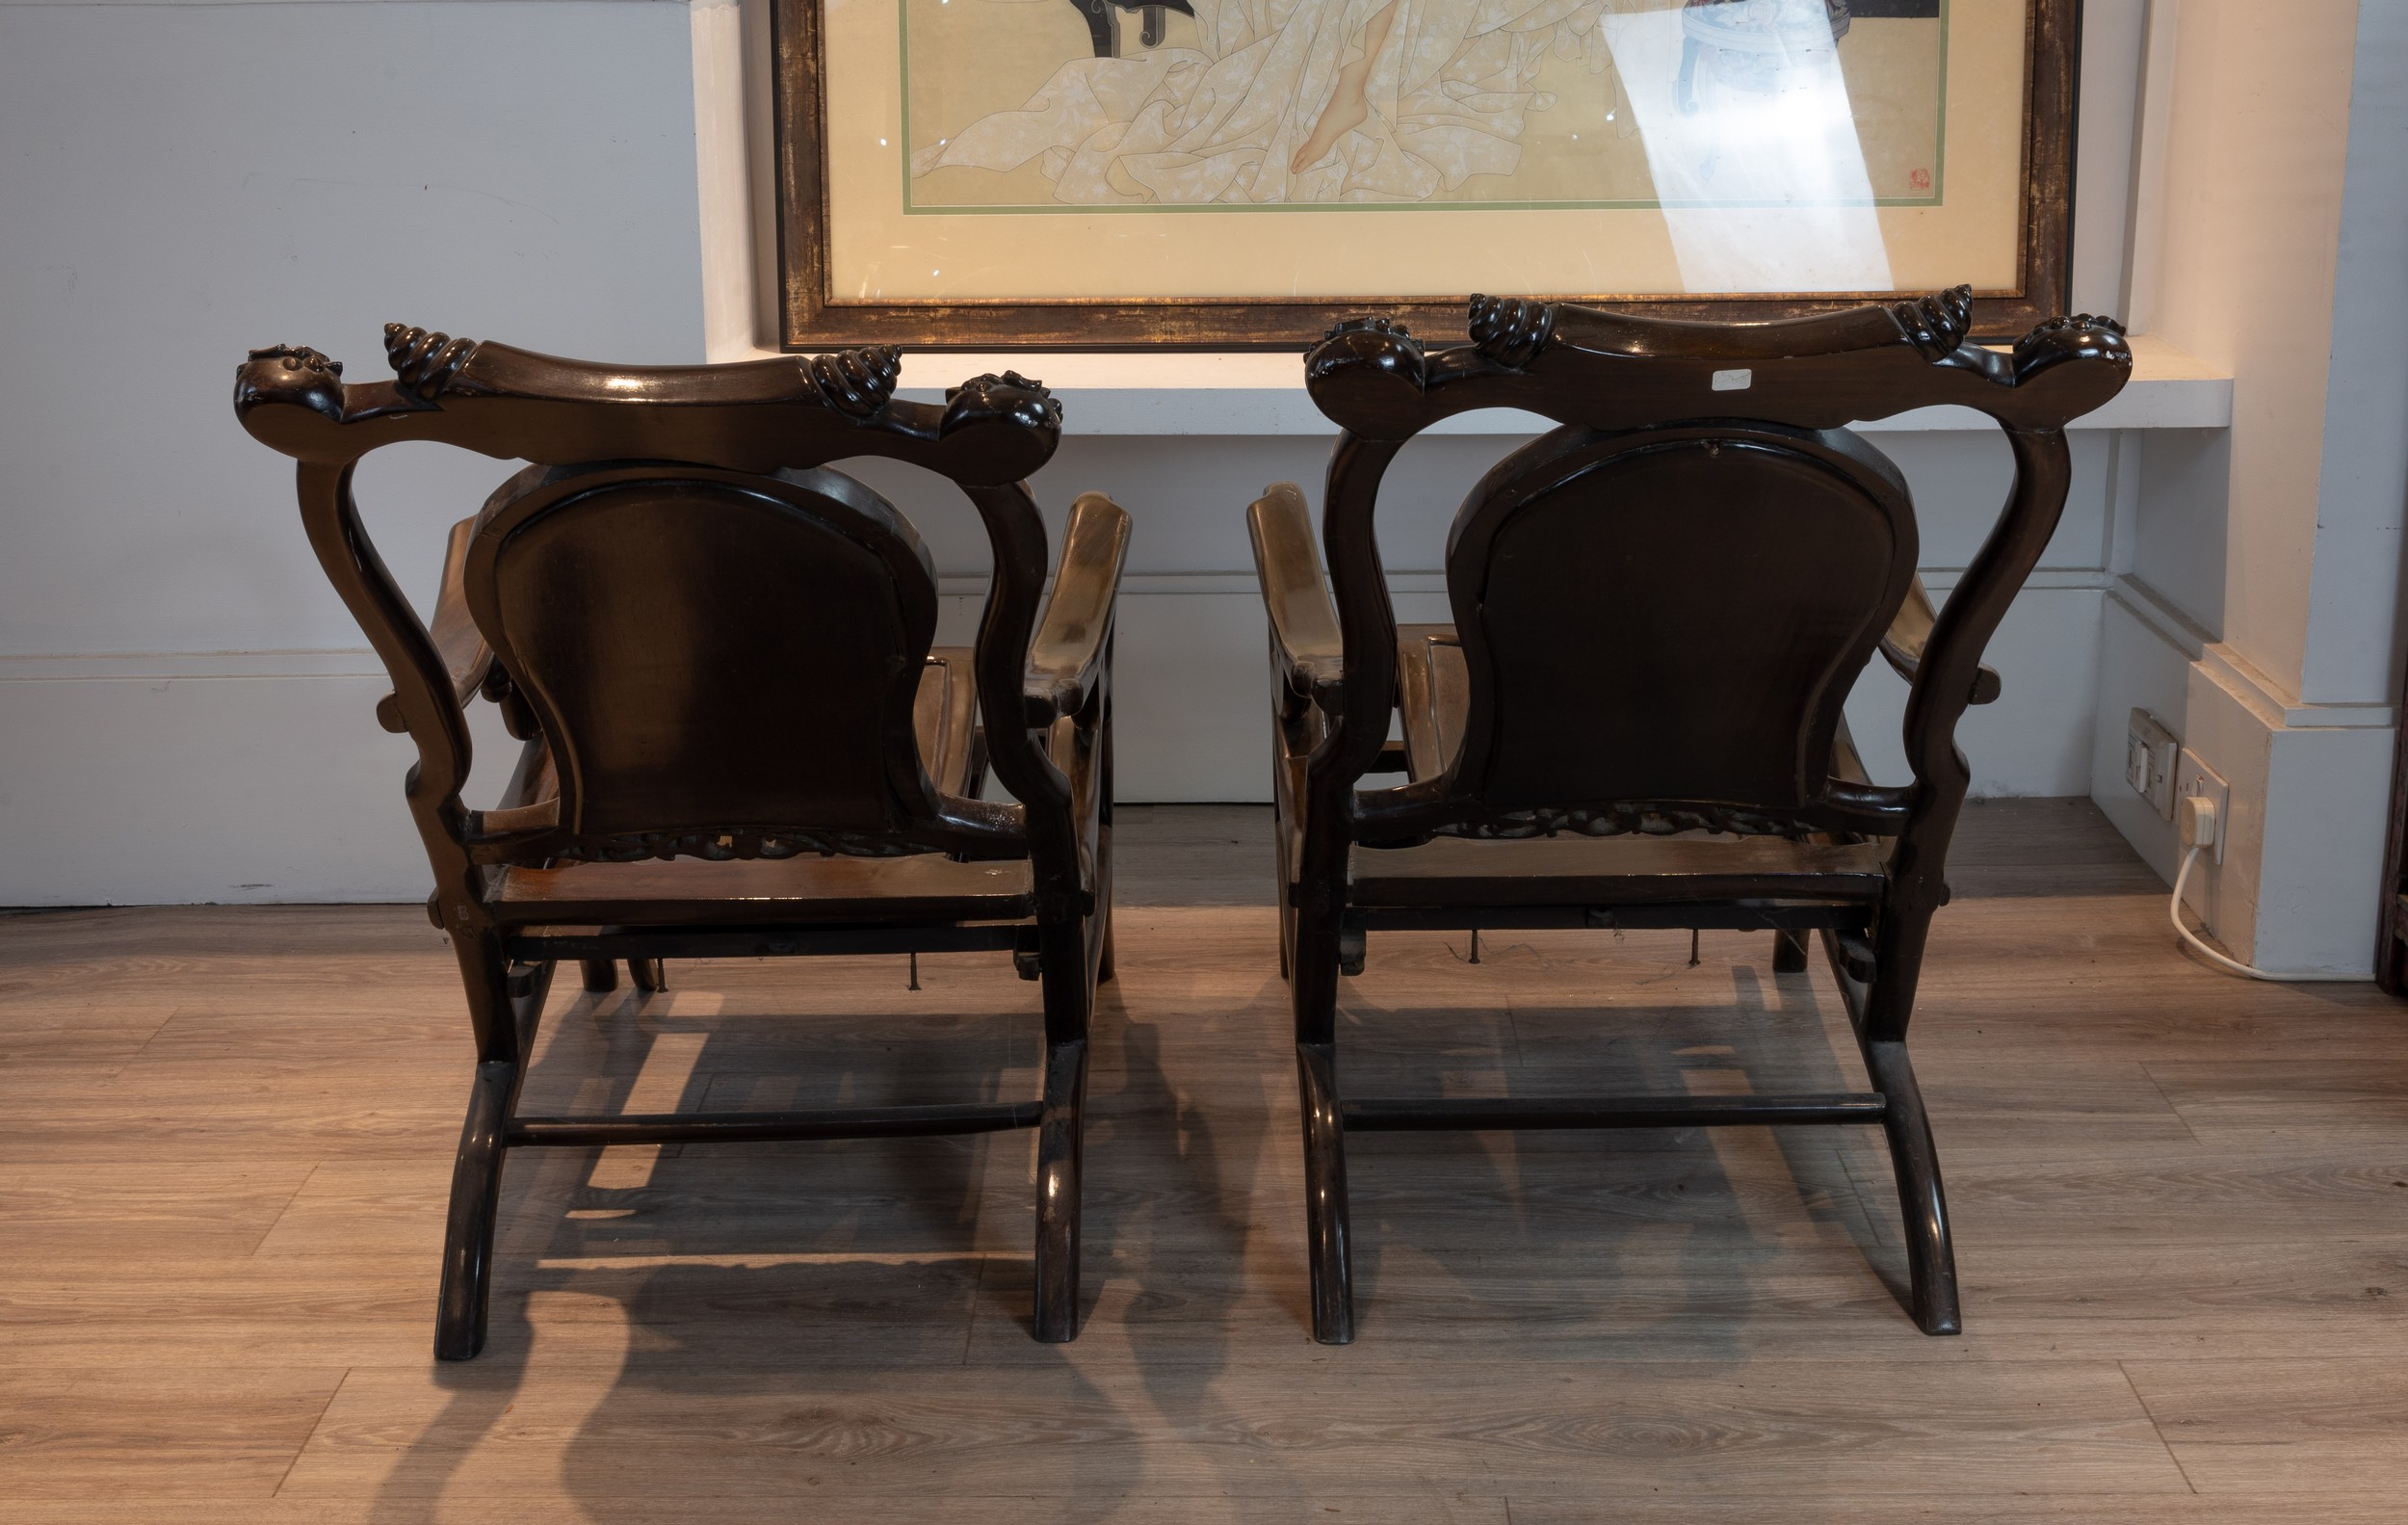 PAIR OF 20TH CENTURY CHINESE HARDWOOD 'MOON GAZING' CHAIRS, With floral carved headrests, Dali - Image 3 of 6